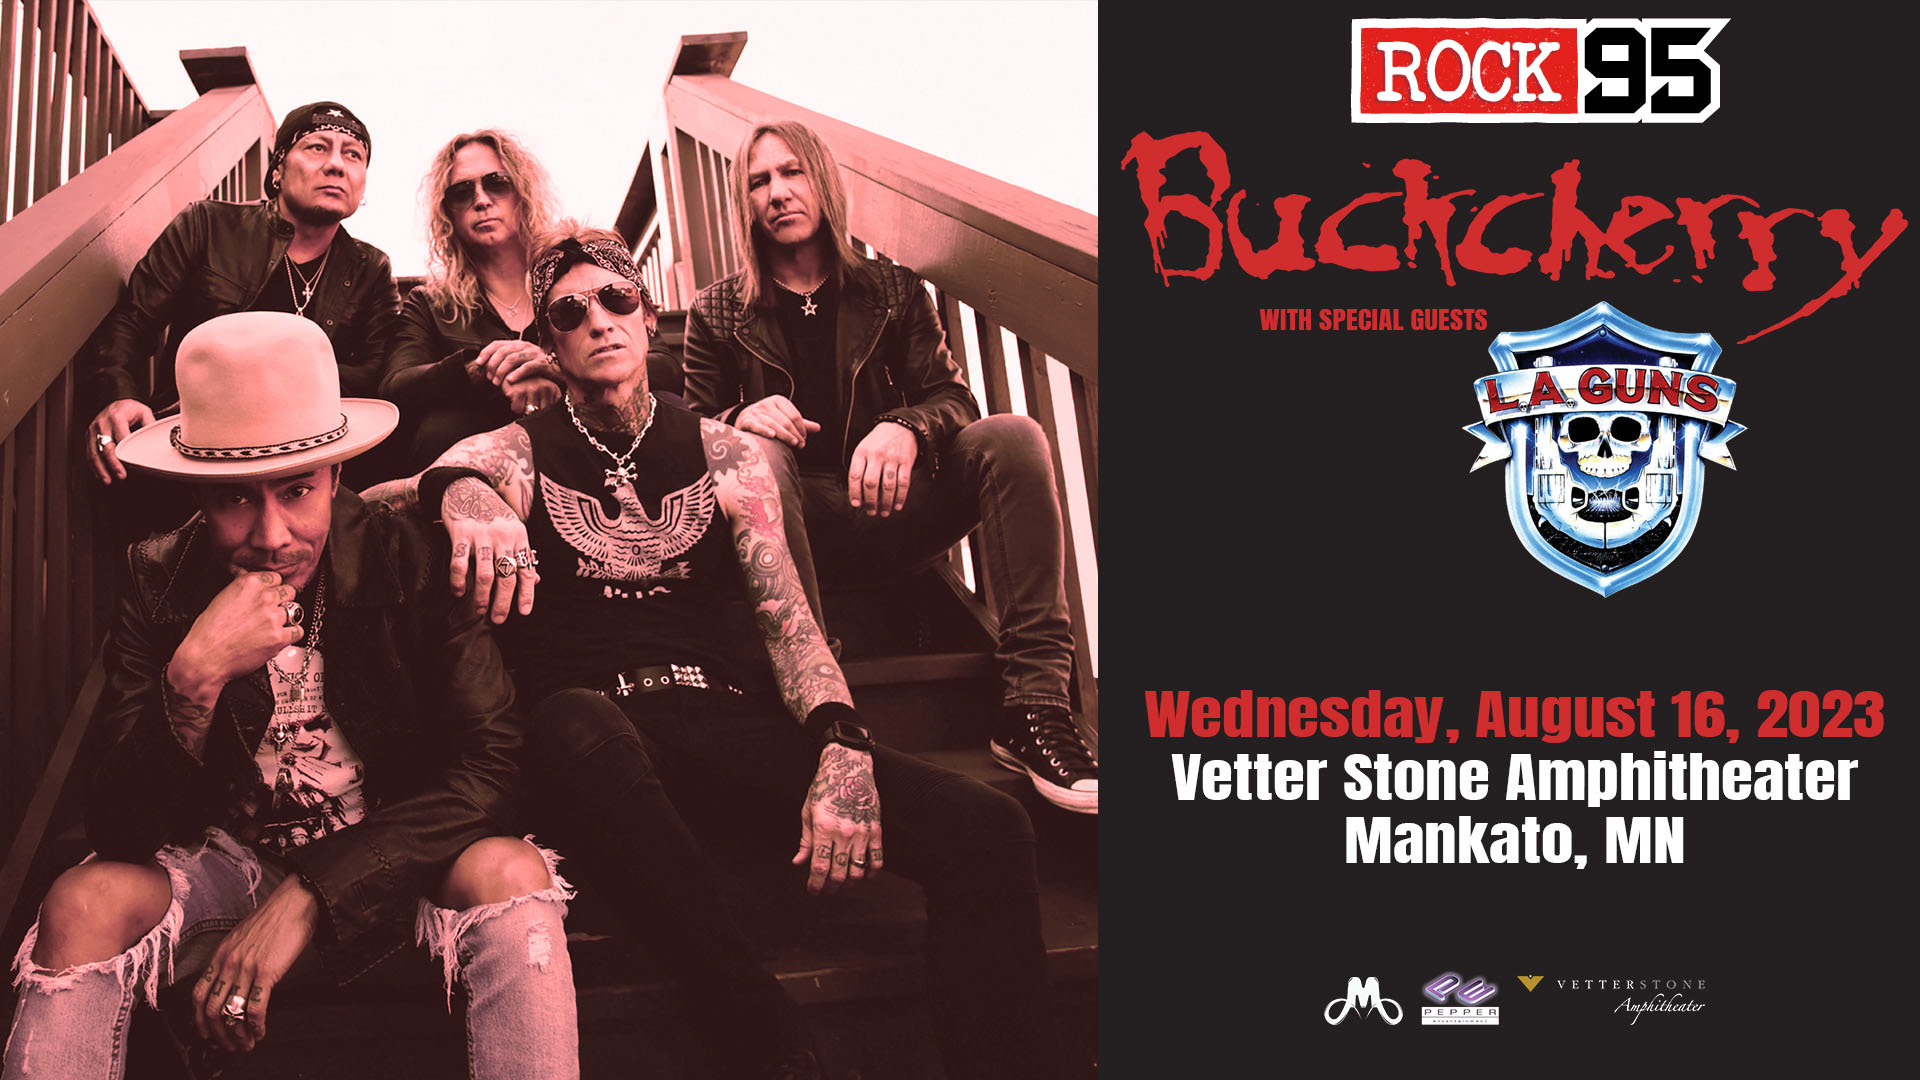 <h1 class="tribe-events-single-event-title">ROCK 95 PRESENTS BUCKCHERRY – L.A. Guns to VETTER STONE AMPHITHEATER</h1>